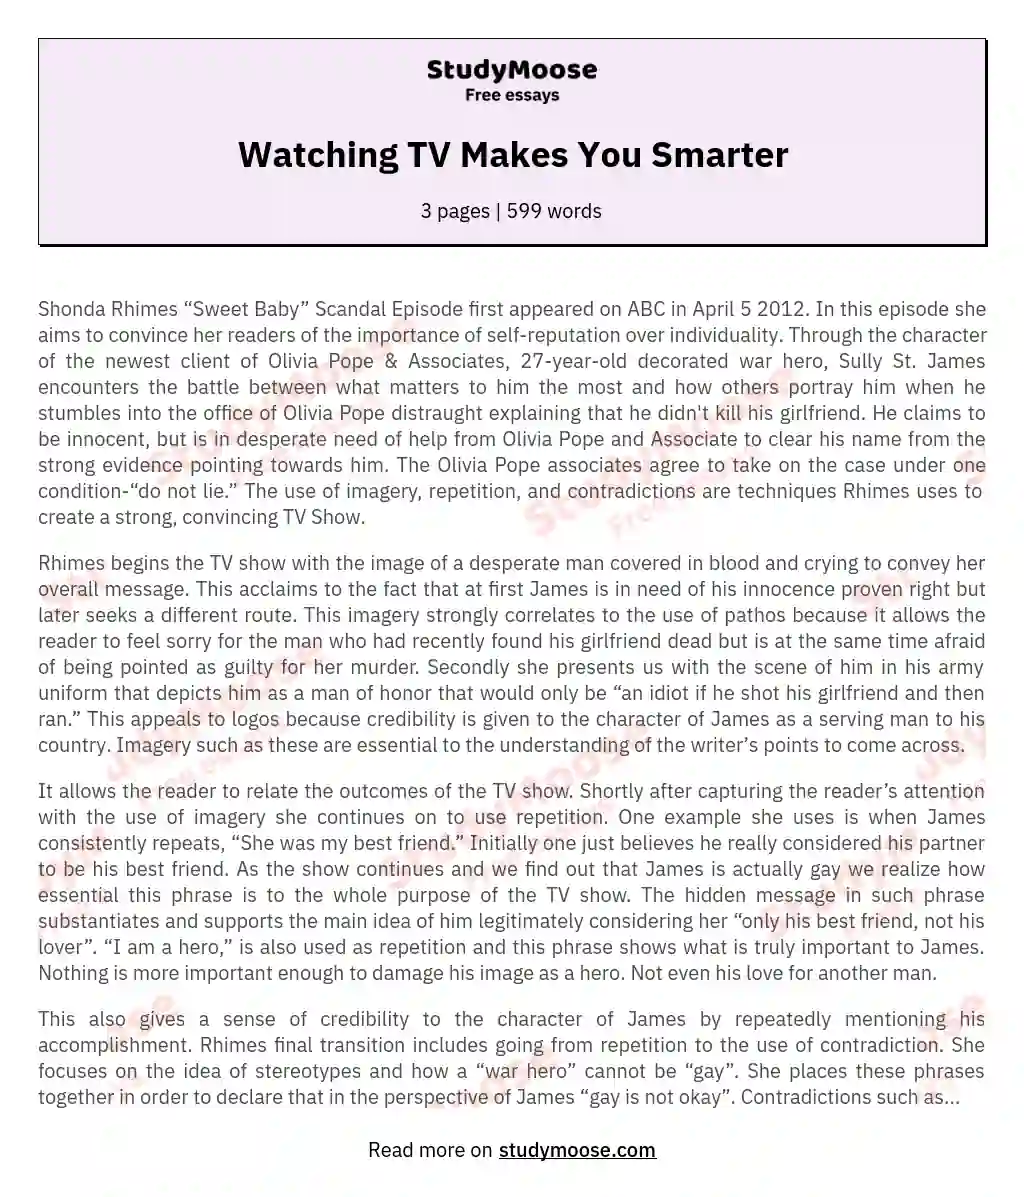 Watching TV Makes You Smarter essay